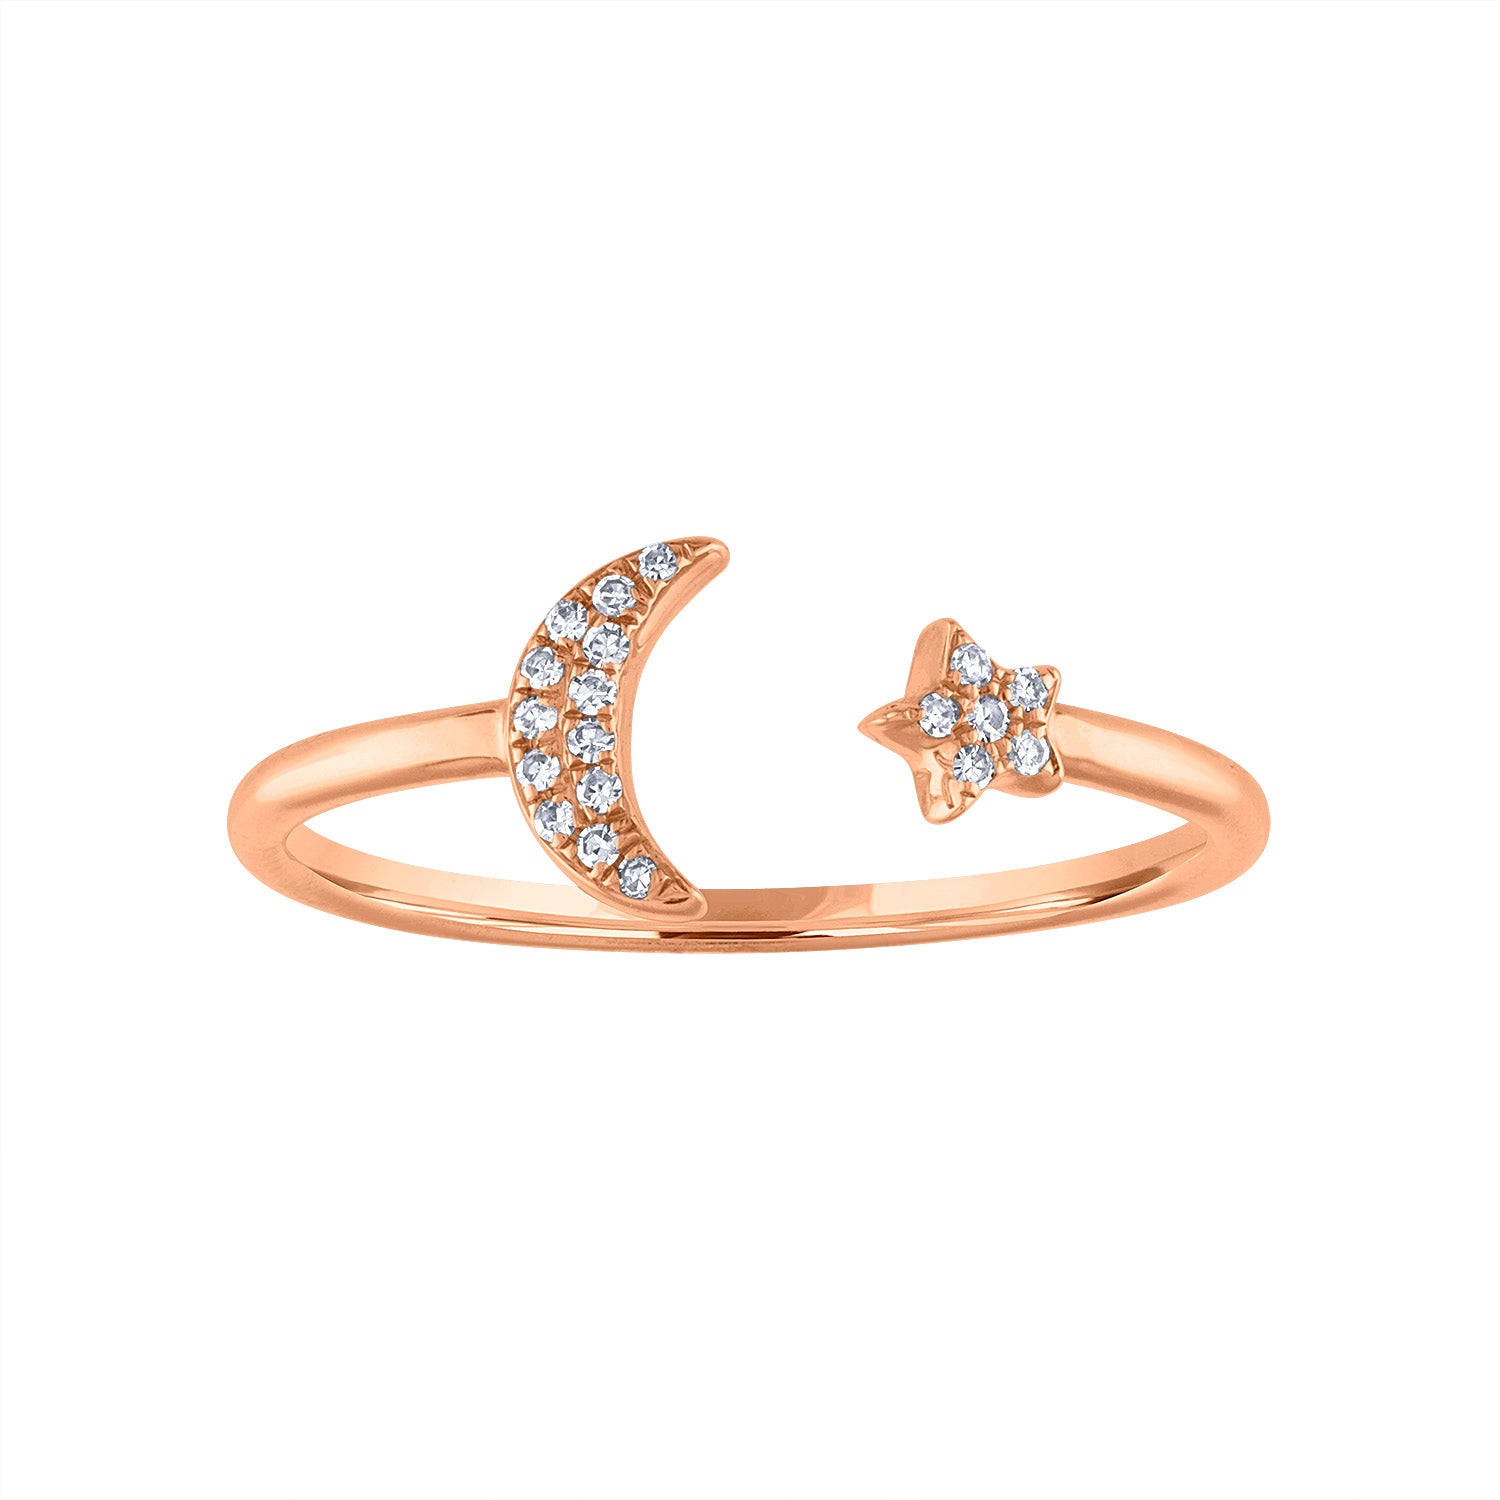 14KT GOLD DIAMOND MOON AND STAR CUFF RING